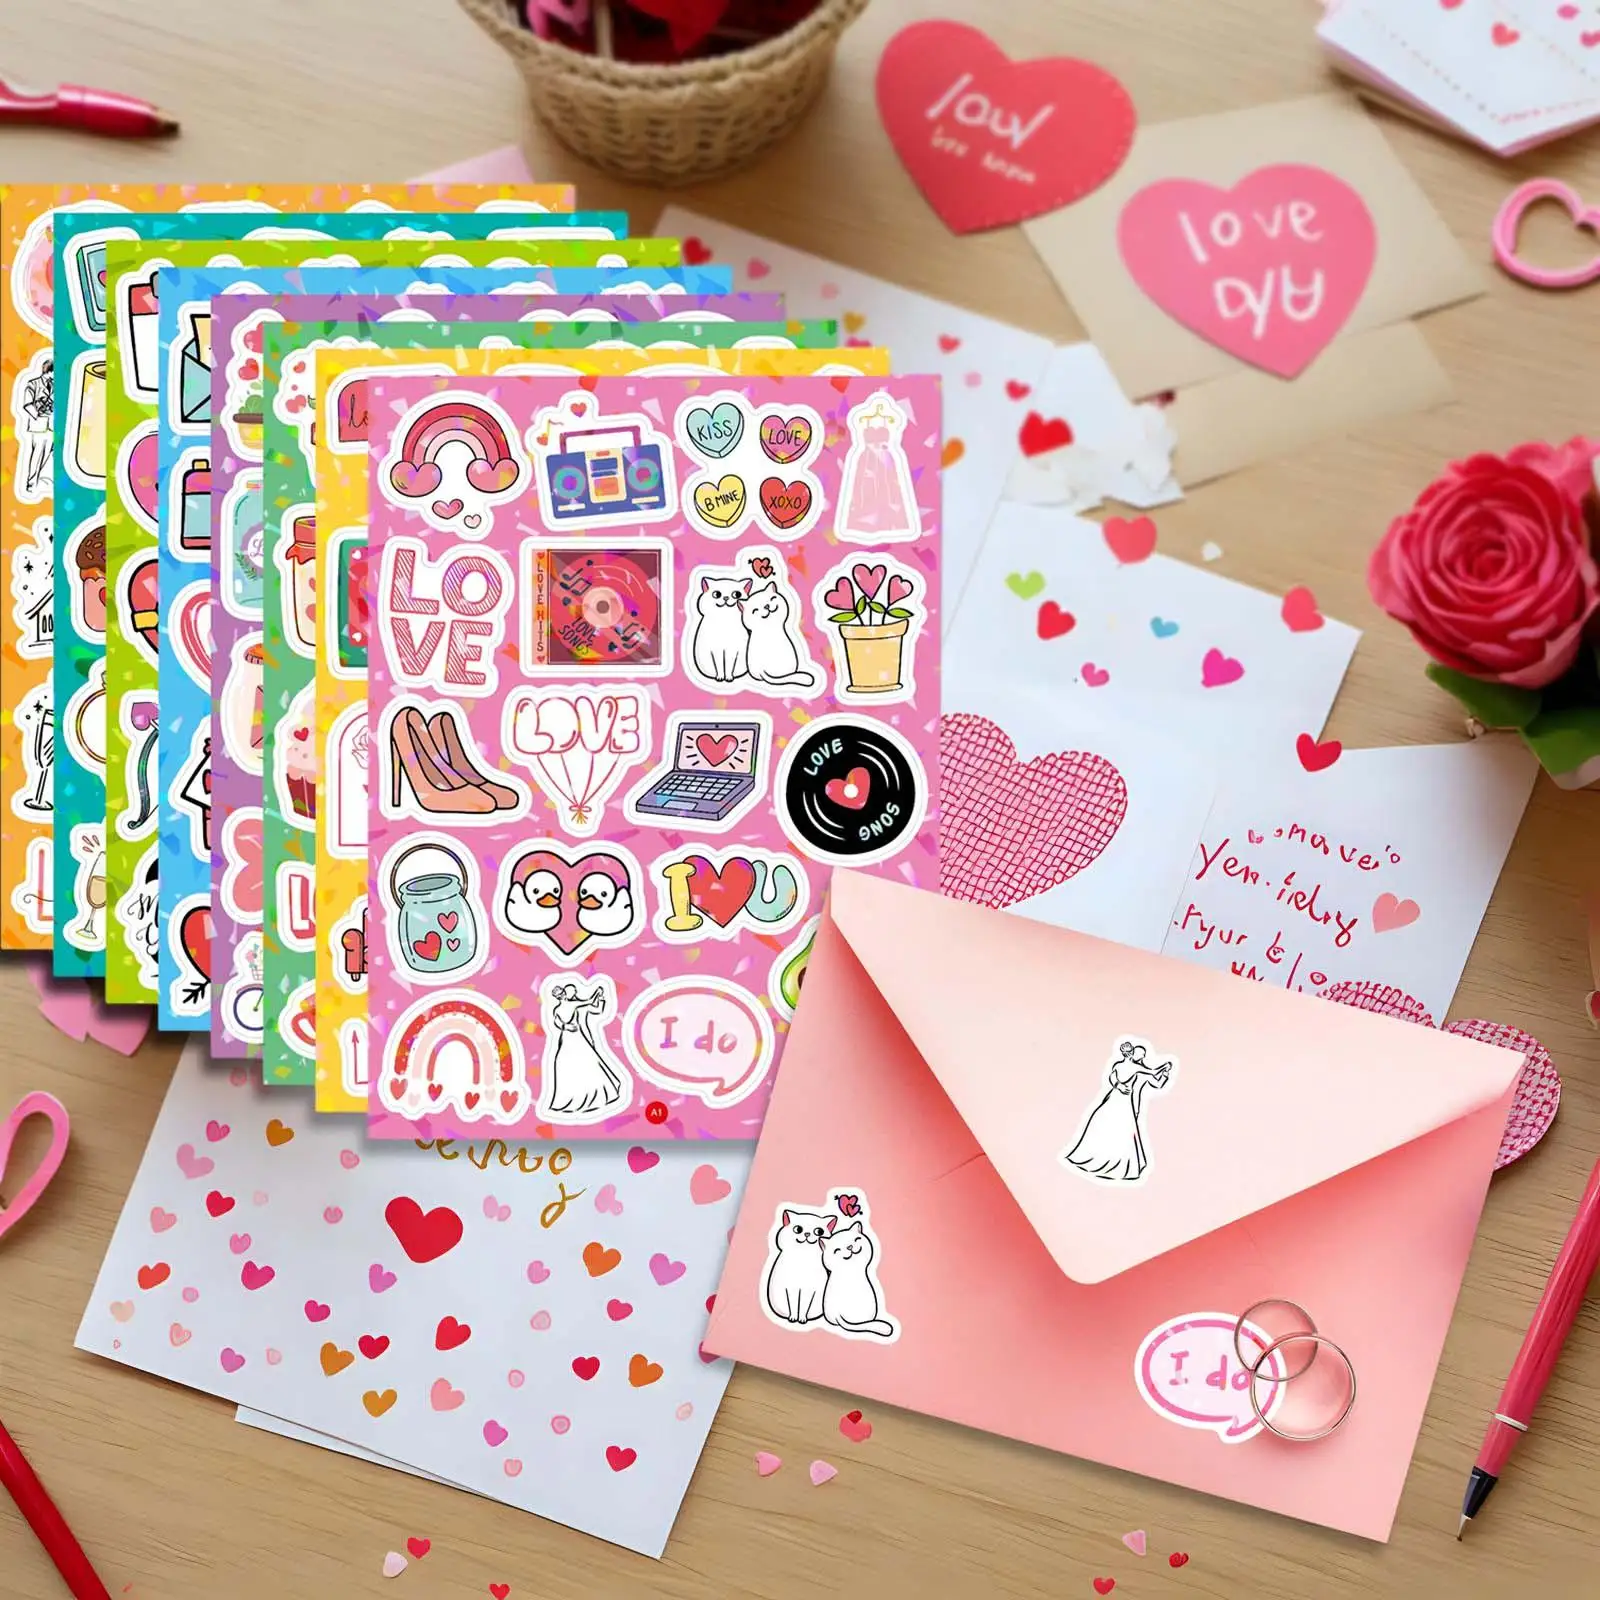 8x Valentine`s Day Stickers Party Supply Decorative Vinyl Waterproof Stickers for Proposals Scrapbooks Anniversary Letters Male